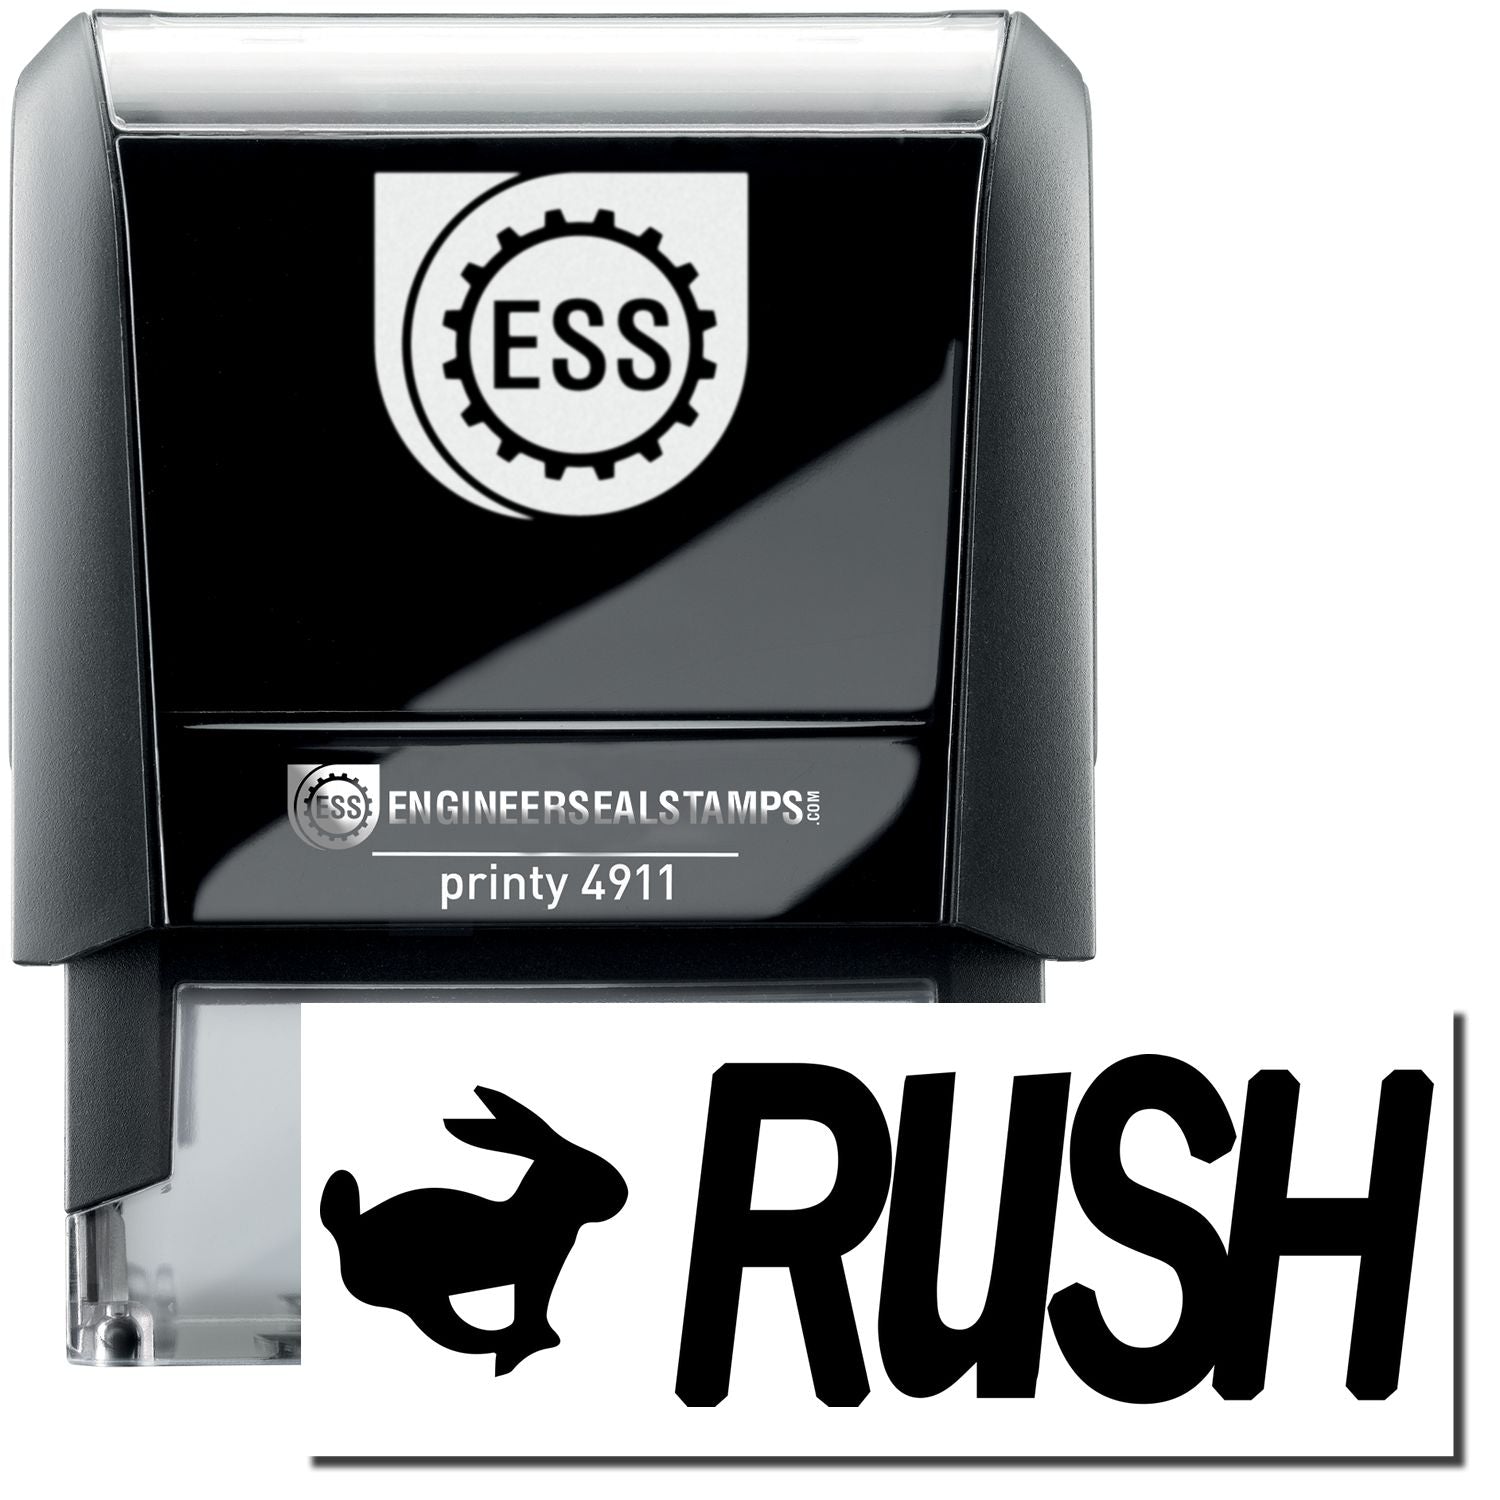 A self-inking stamp with a stamped image showing how the text "RUSH" in bold font and an image of a rabbit on the left is displayed after stamping.